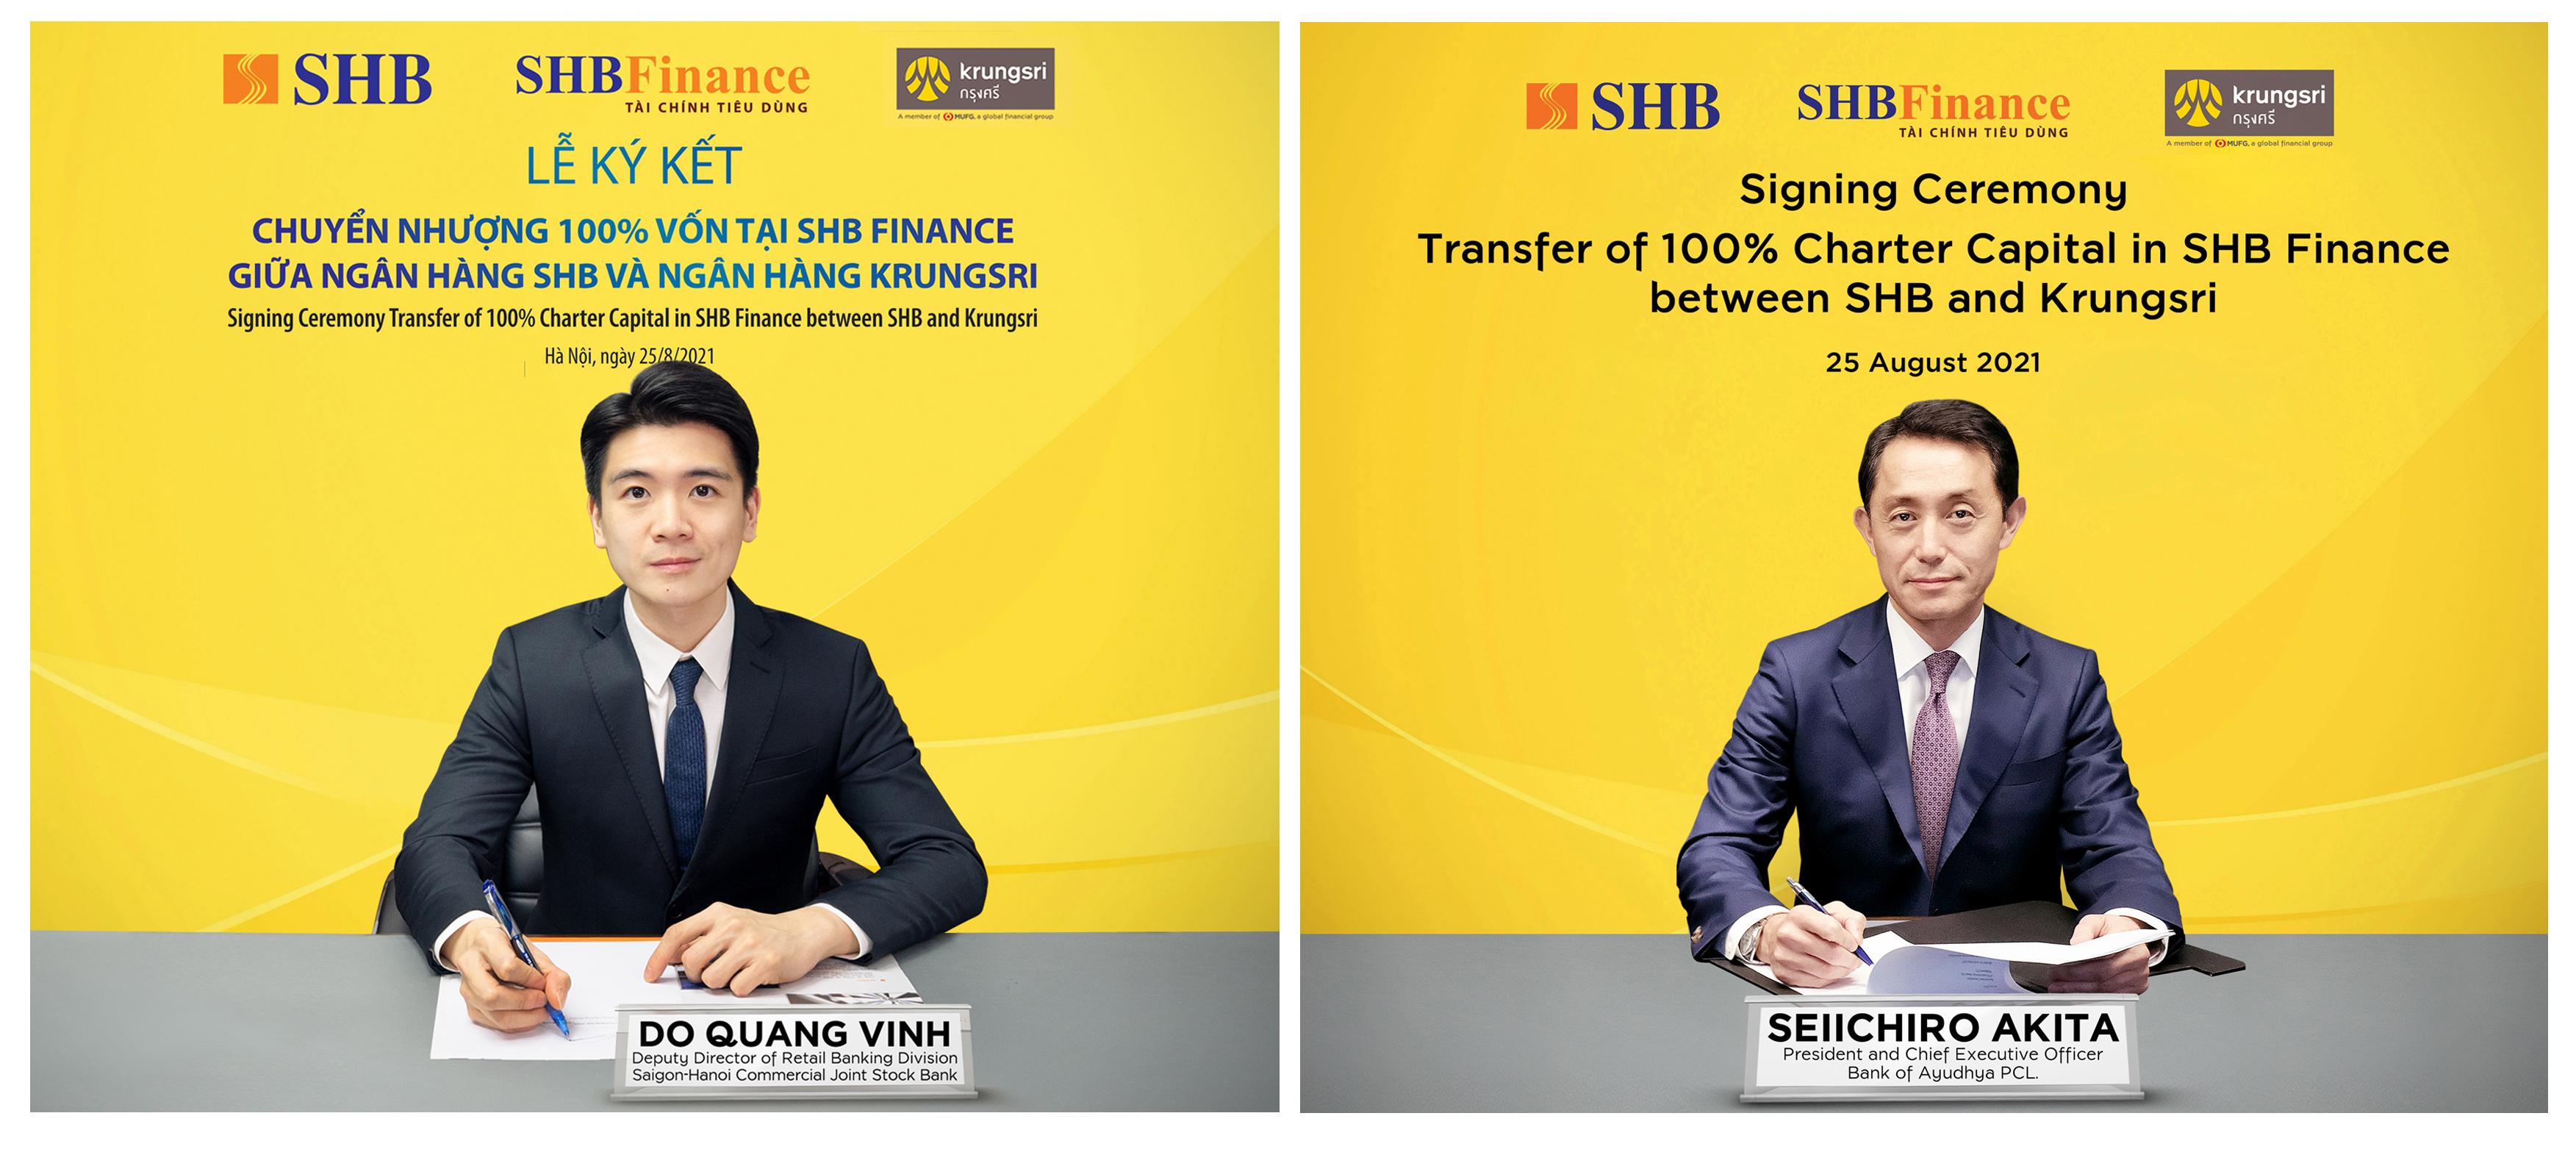 SHB sets to transfer 100% of capital in SHB Finance to Krungsri